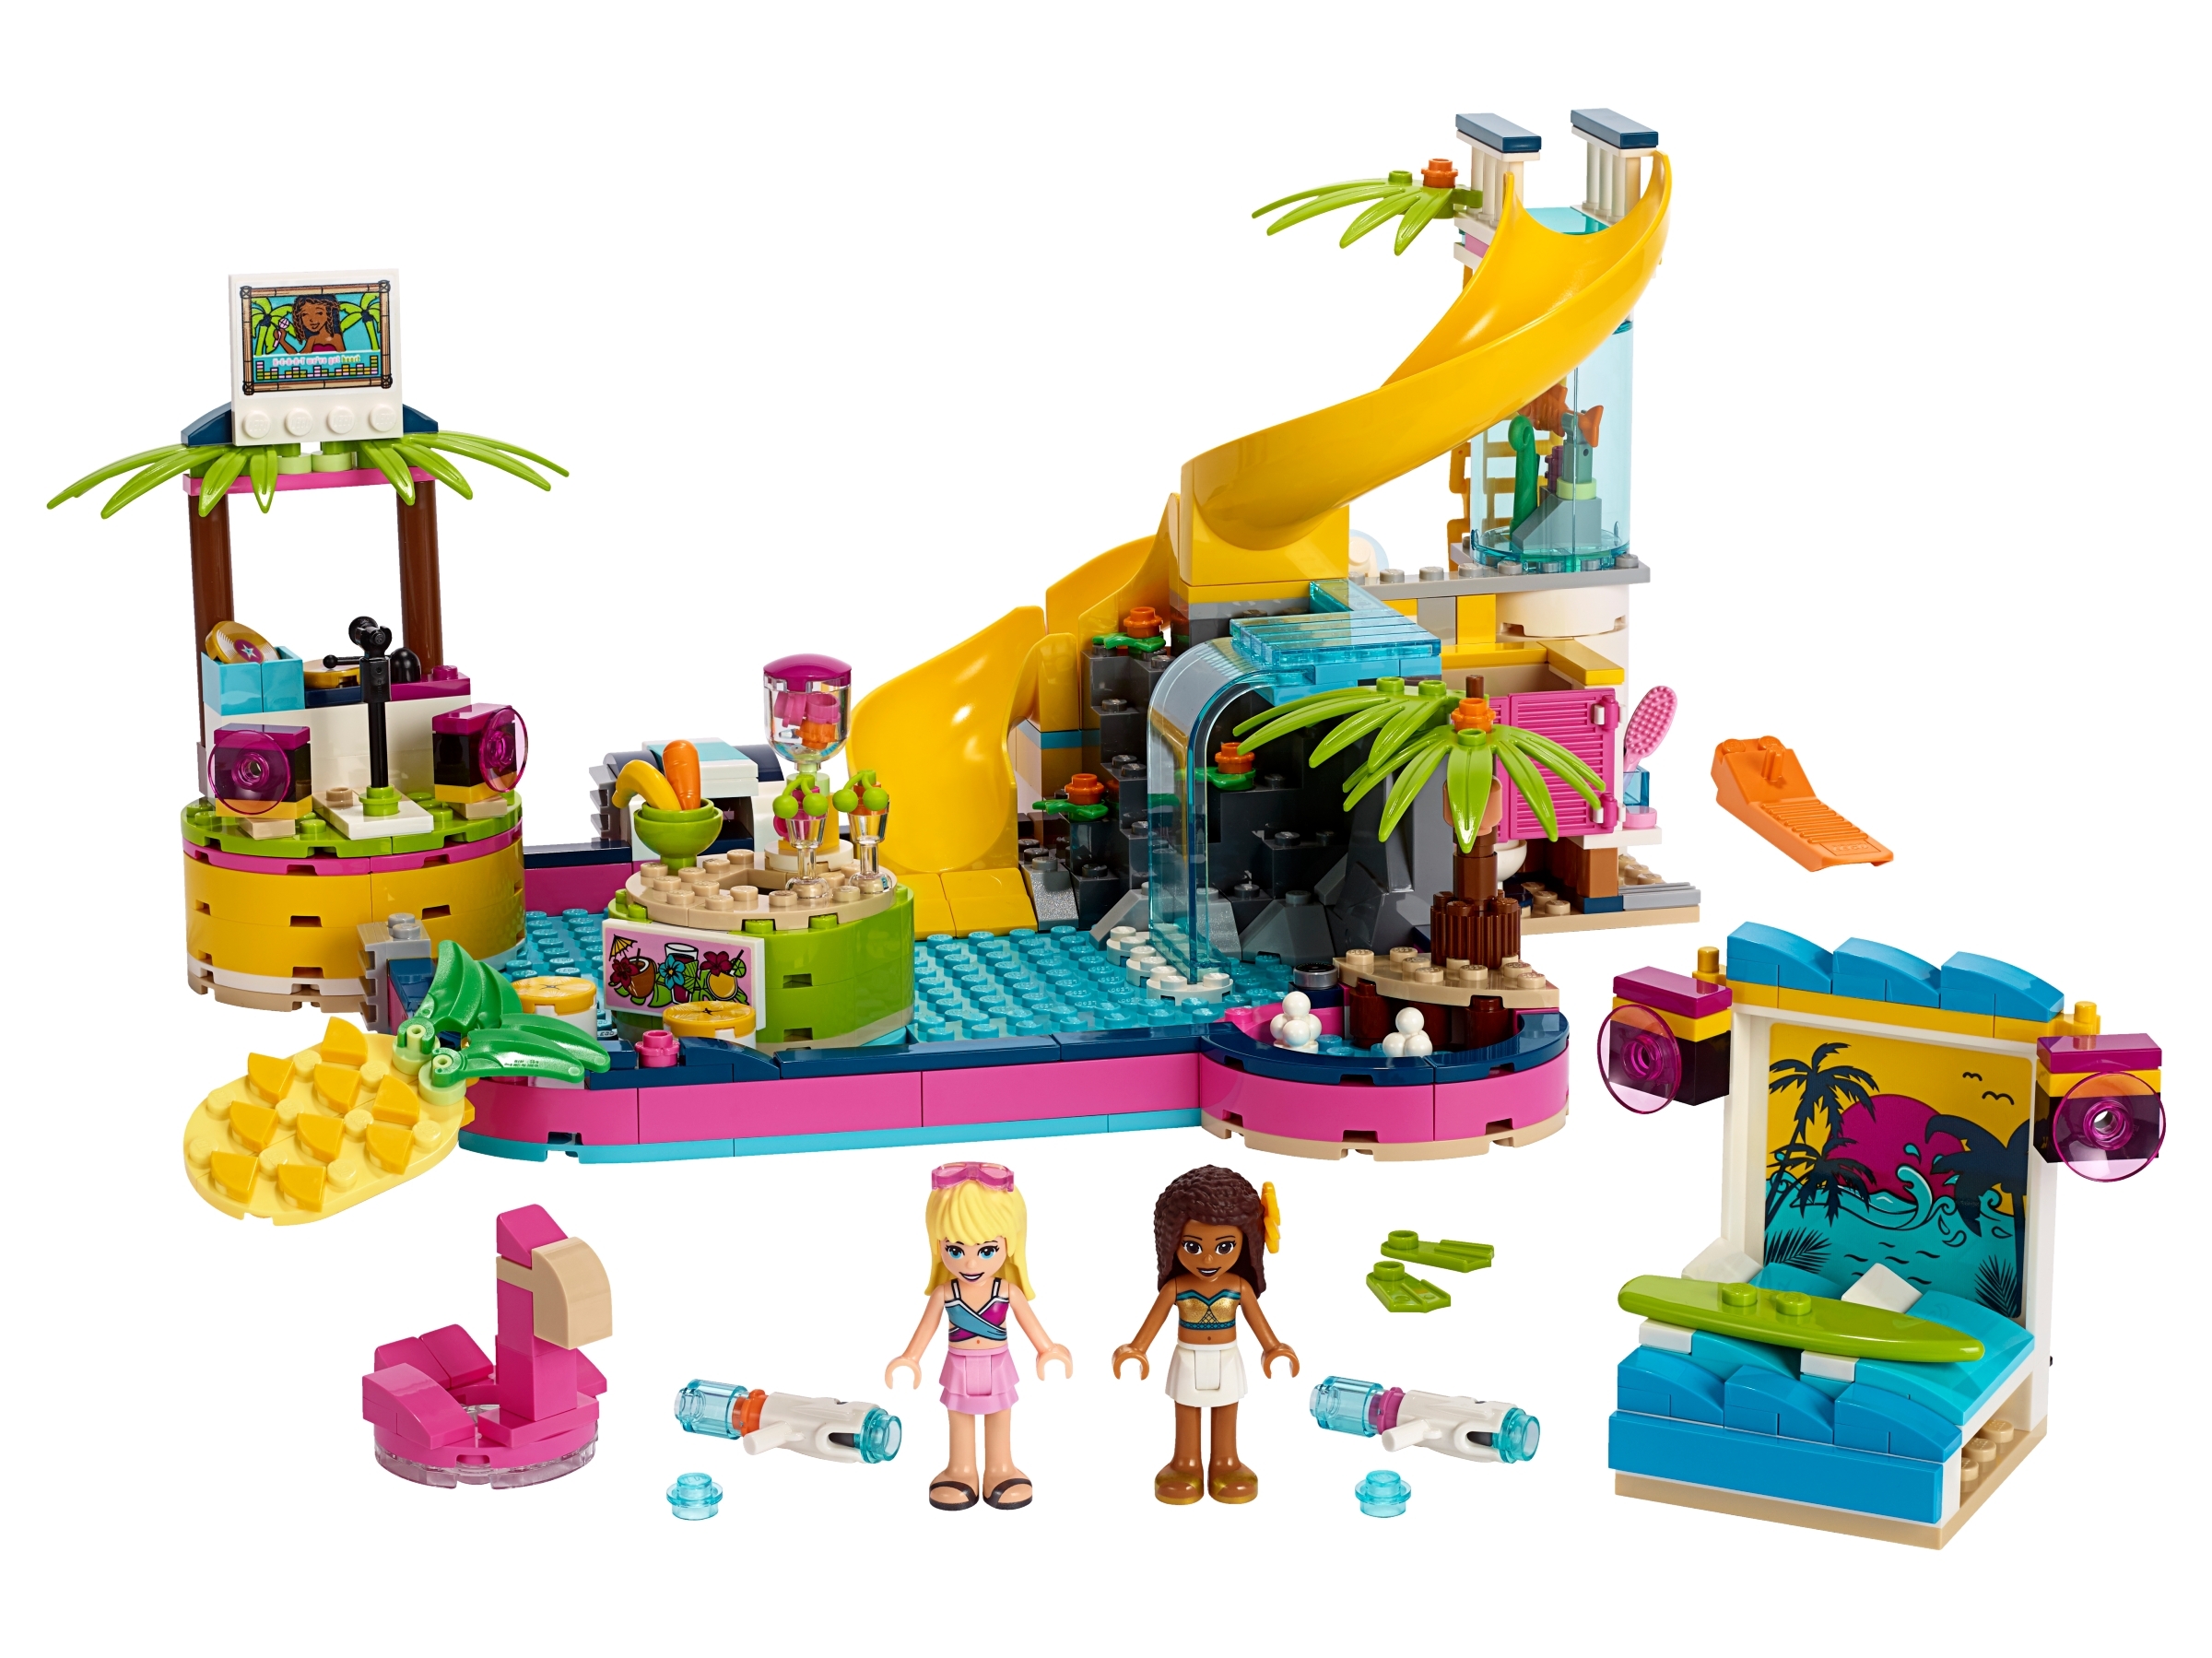 Andrea's Party 41374 | Friends Buy online at the Official LEGO® Shop